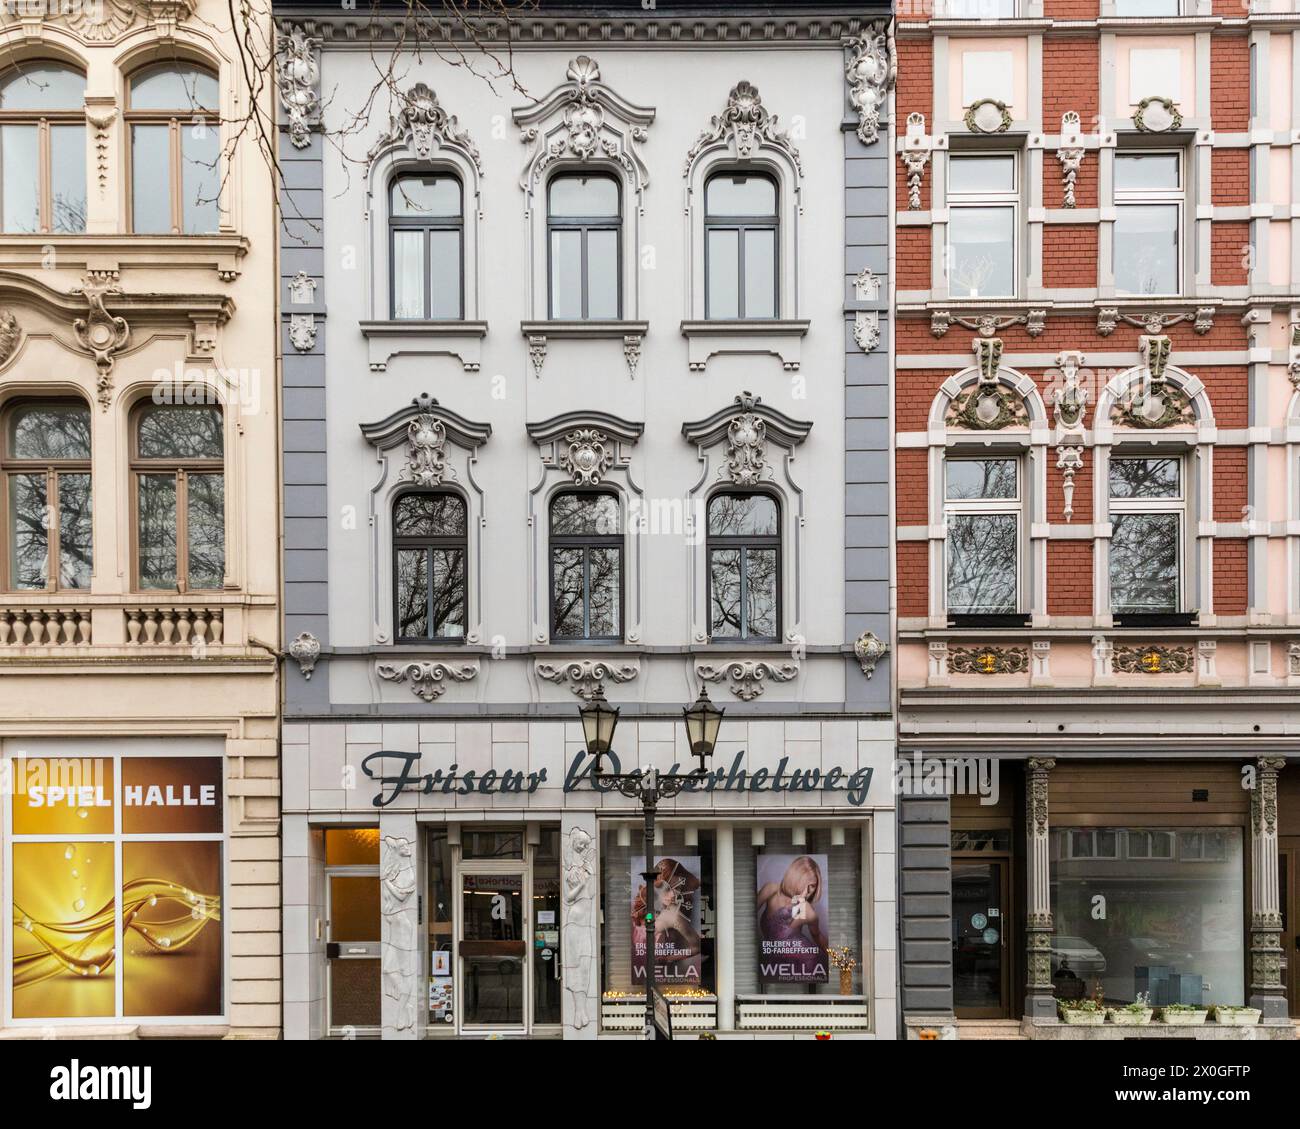 Building facades and shops in Wilhelminian style at Neumarkt, Duisburg Ruhrort, Ruhr Area, Germany Stock Photo